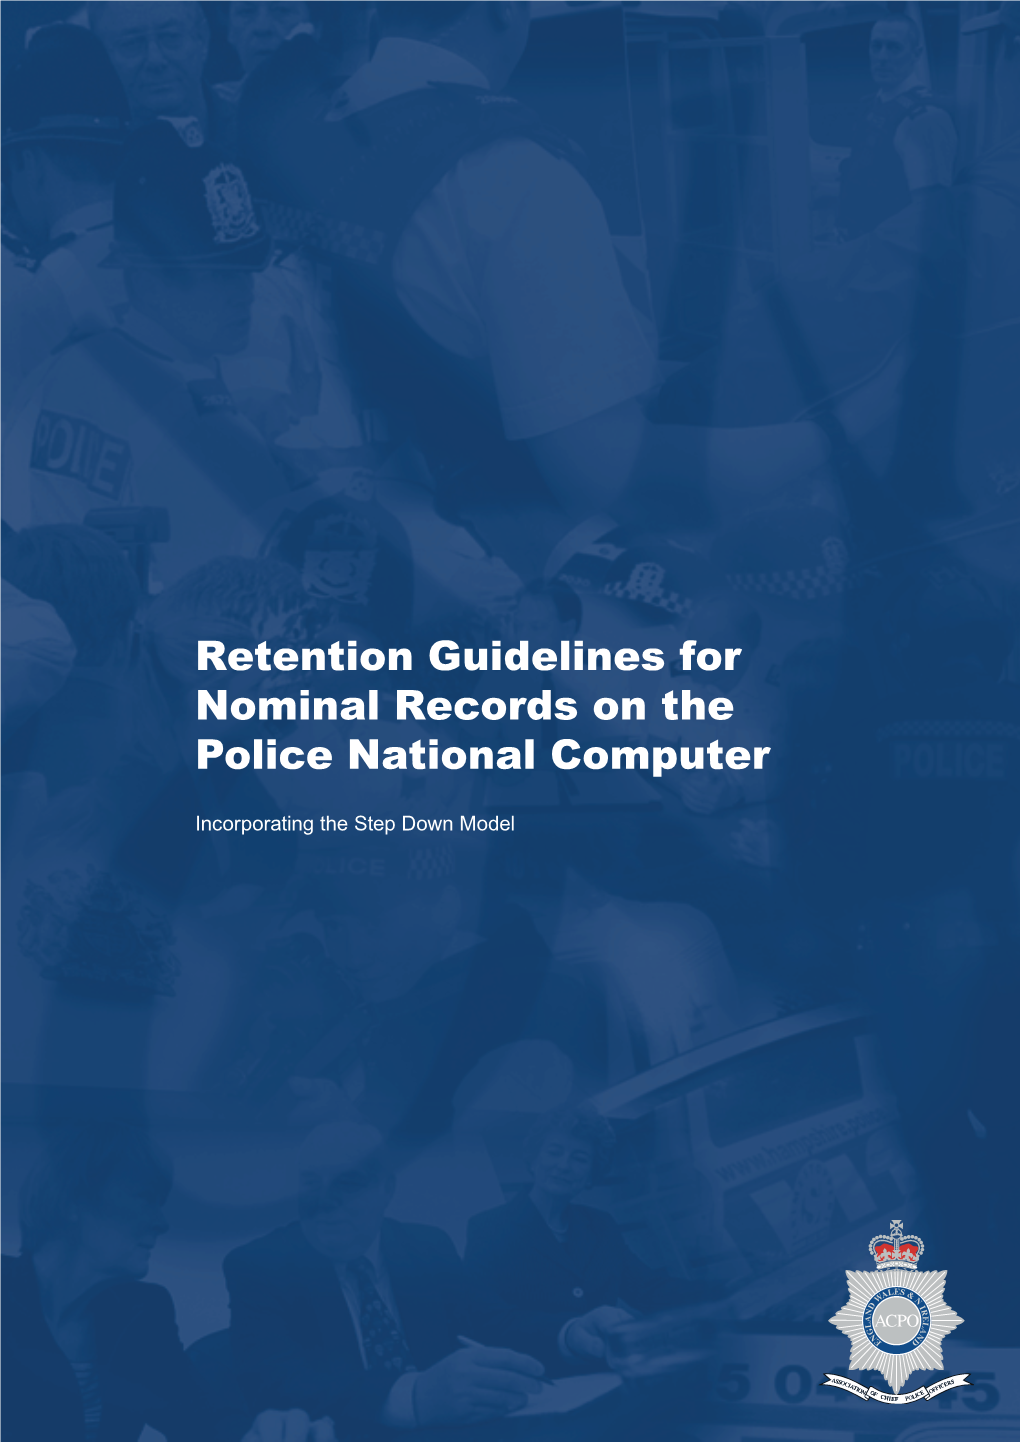 Retention Guidelines for Nominal Records on the Police National Computer